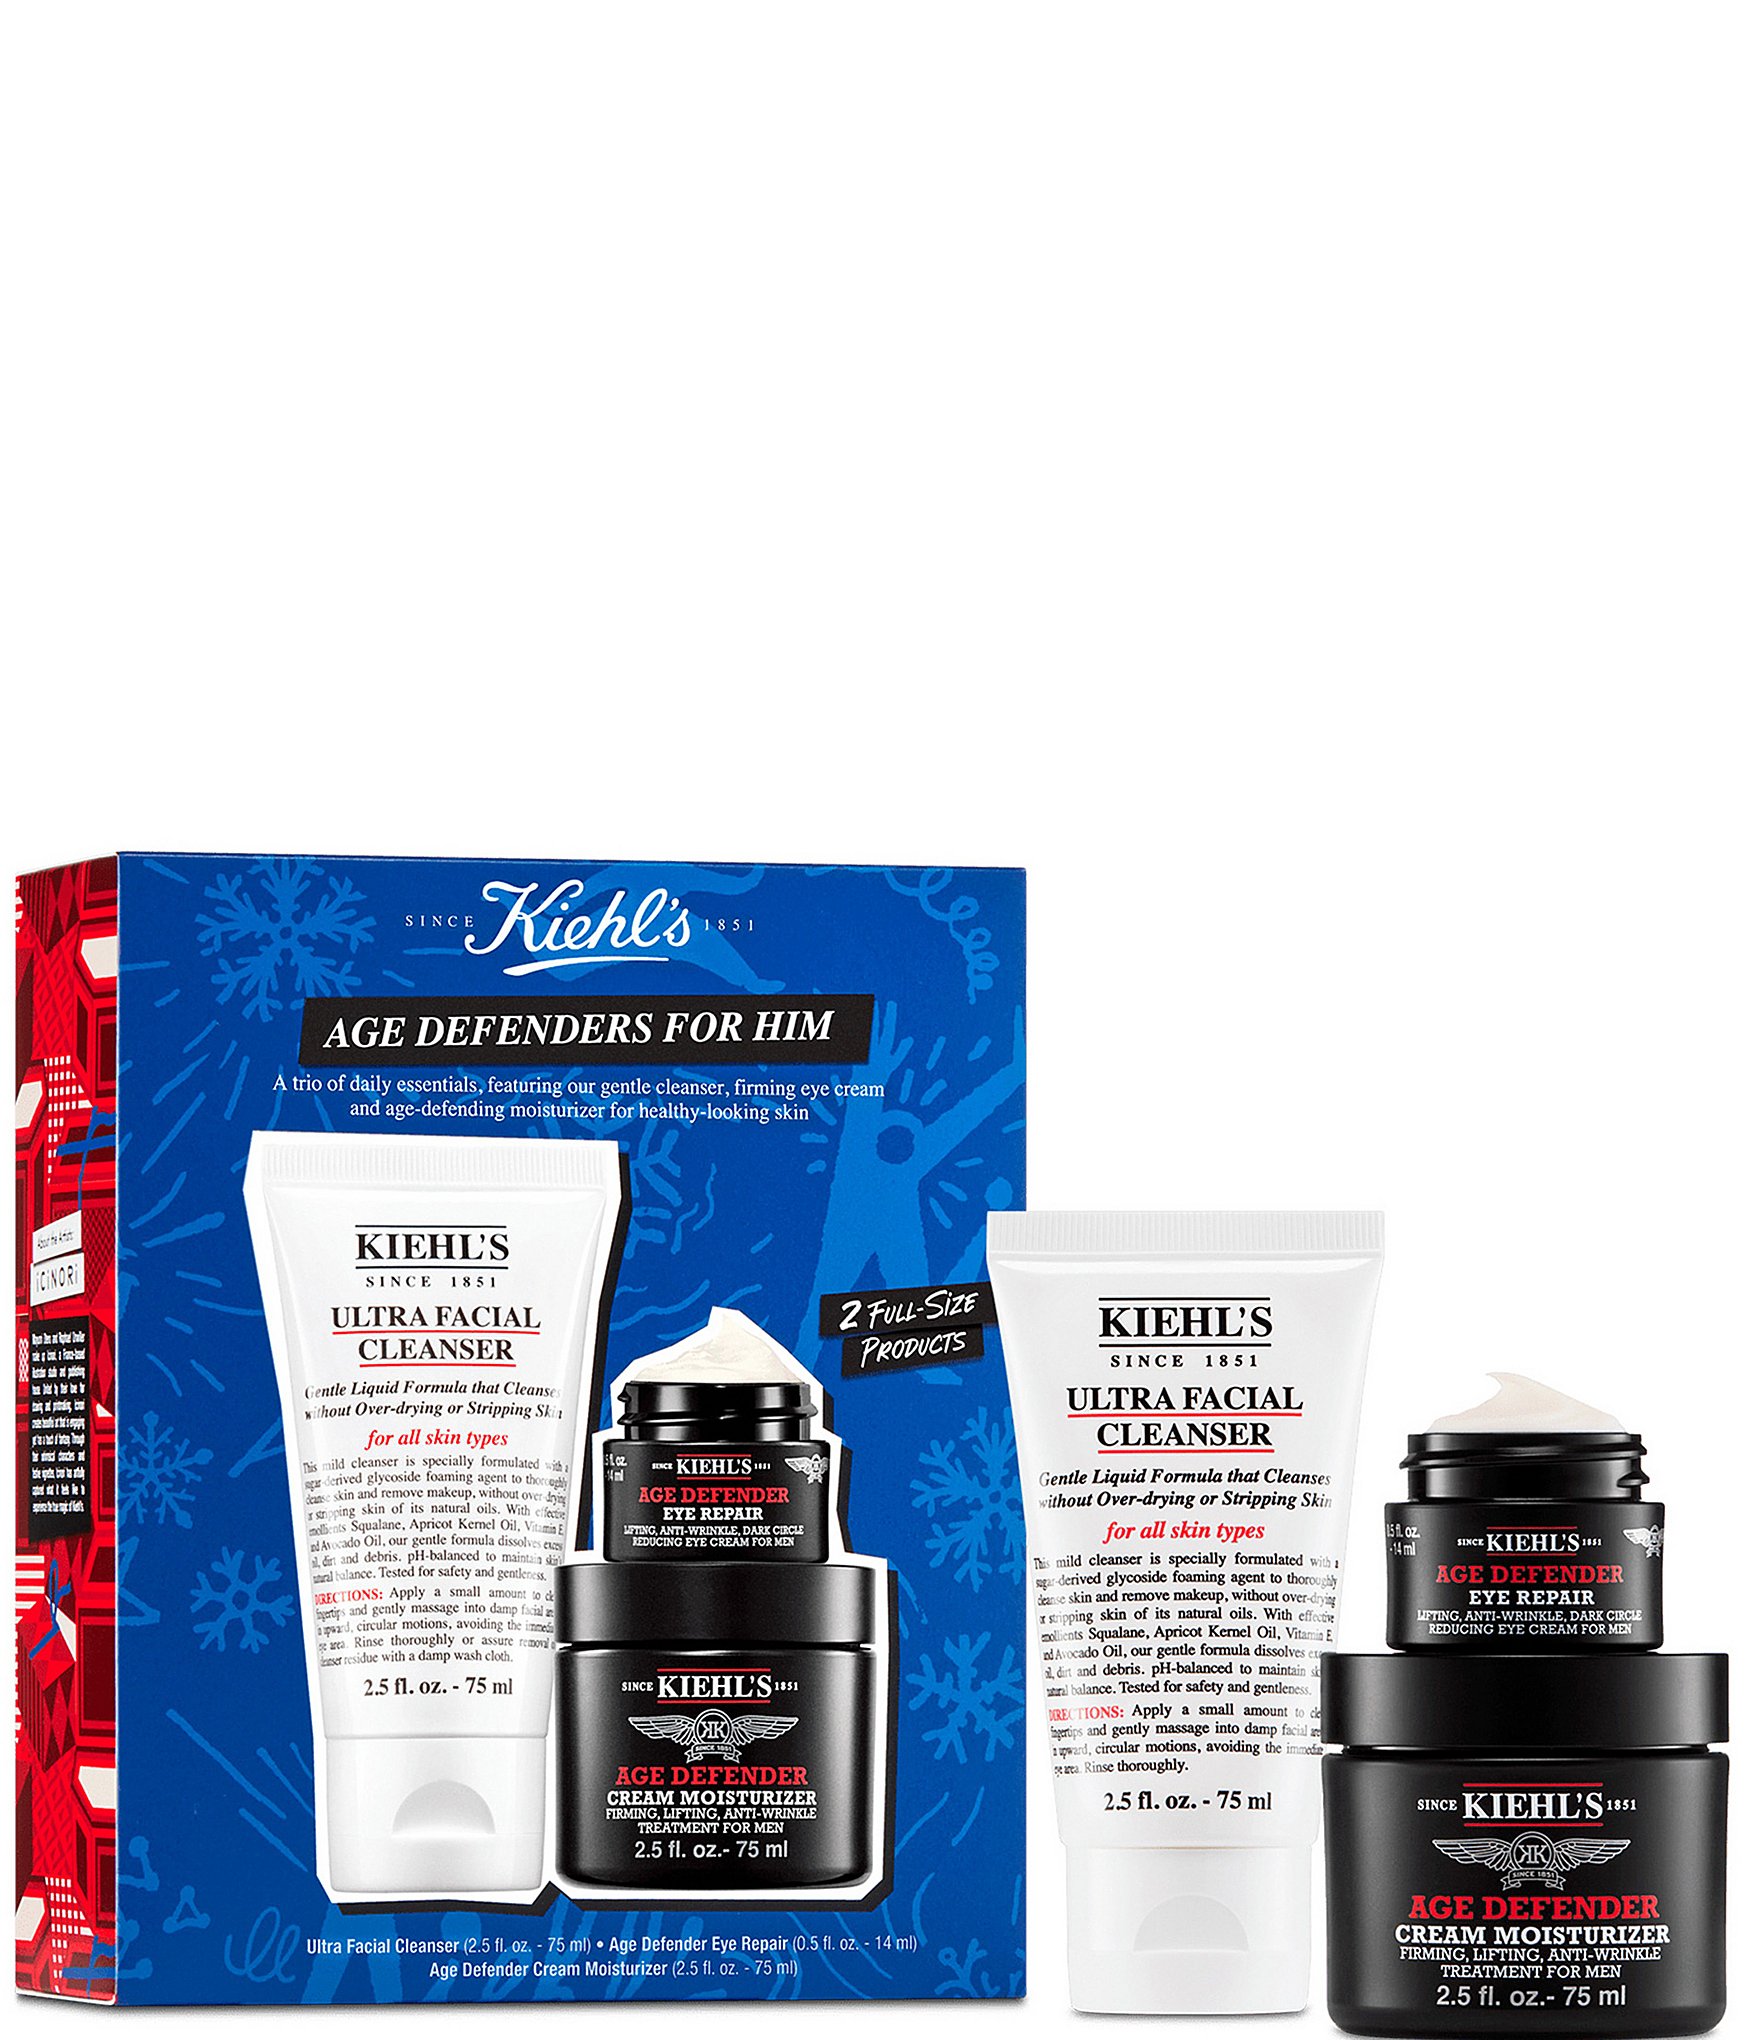 Kiehl's Since 1851 Youthful Holiday Classics Anti-Aging Essentials